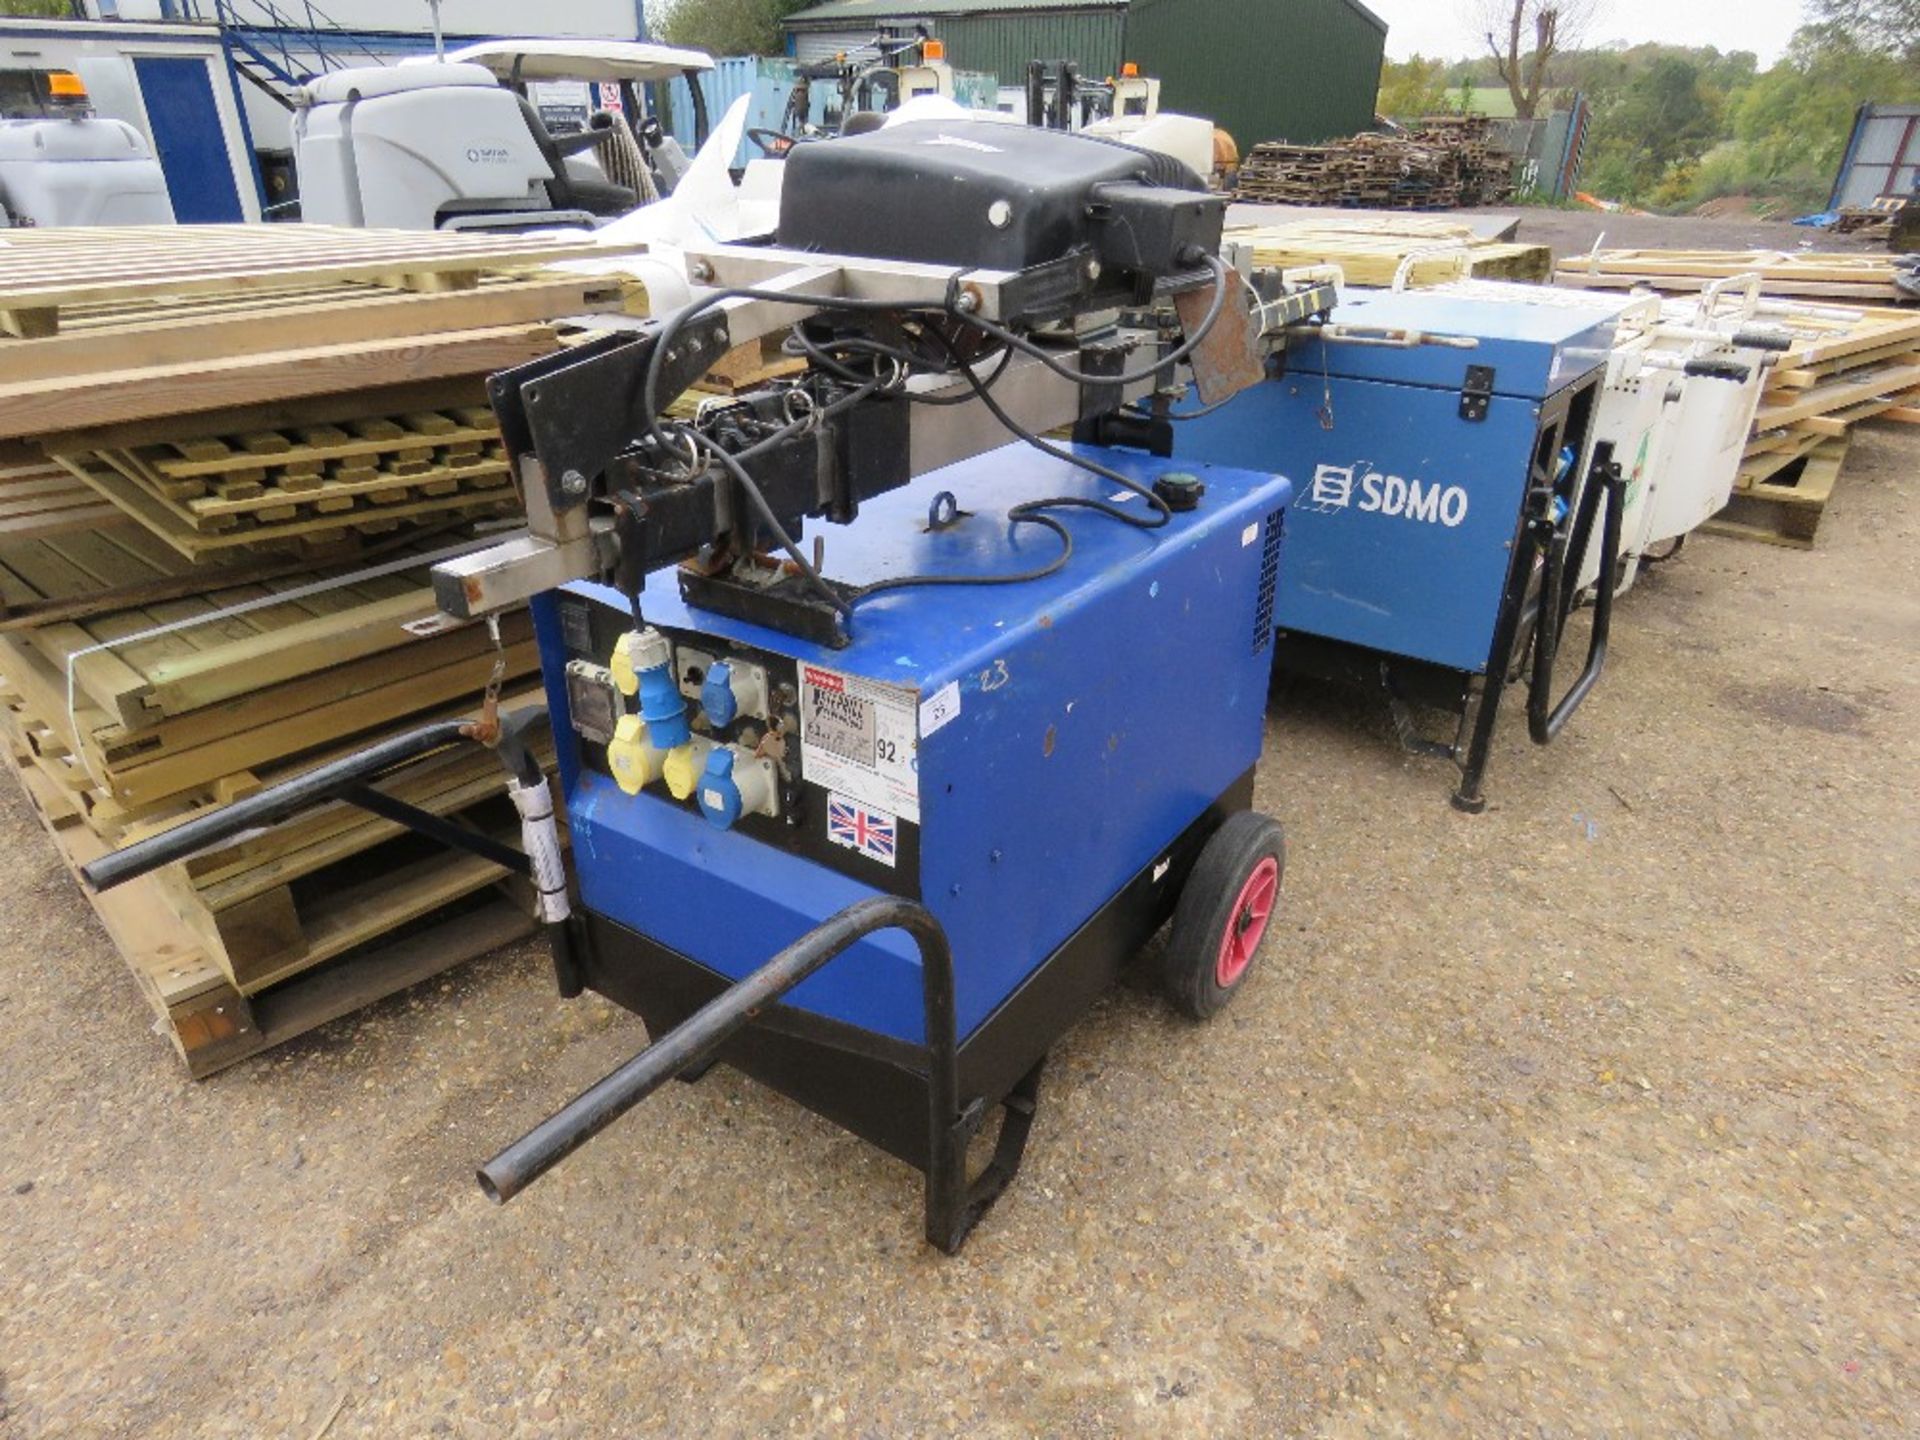 STEPHILL 6KVA BARROW GENERATOR WITH LIGHTING TOWER MAST ATTACHED.